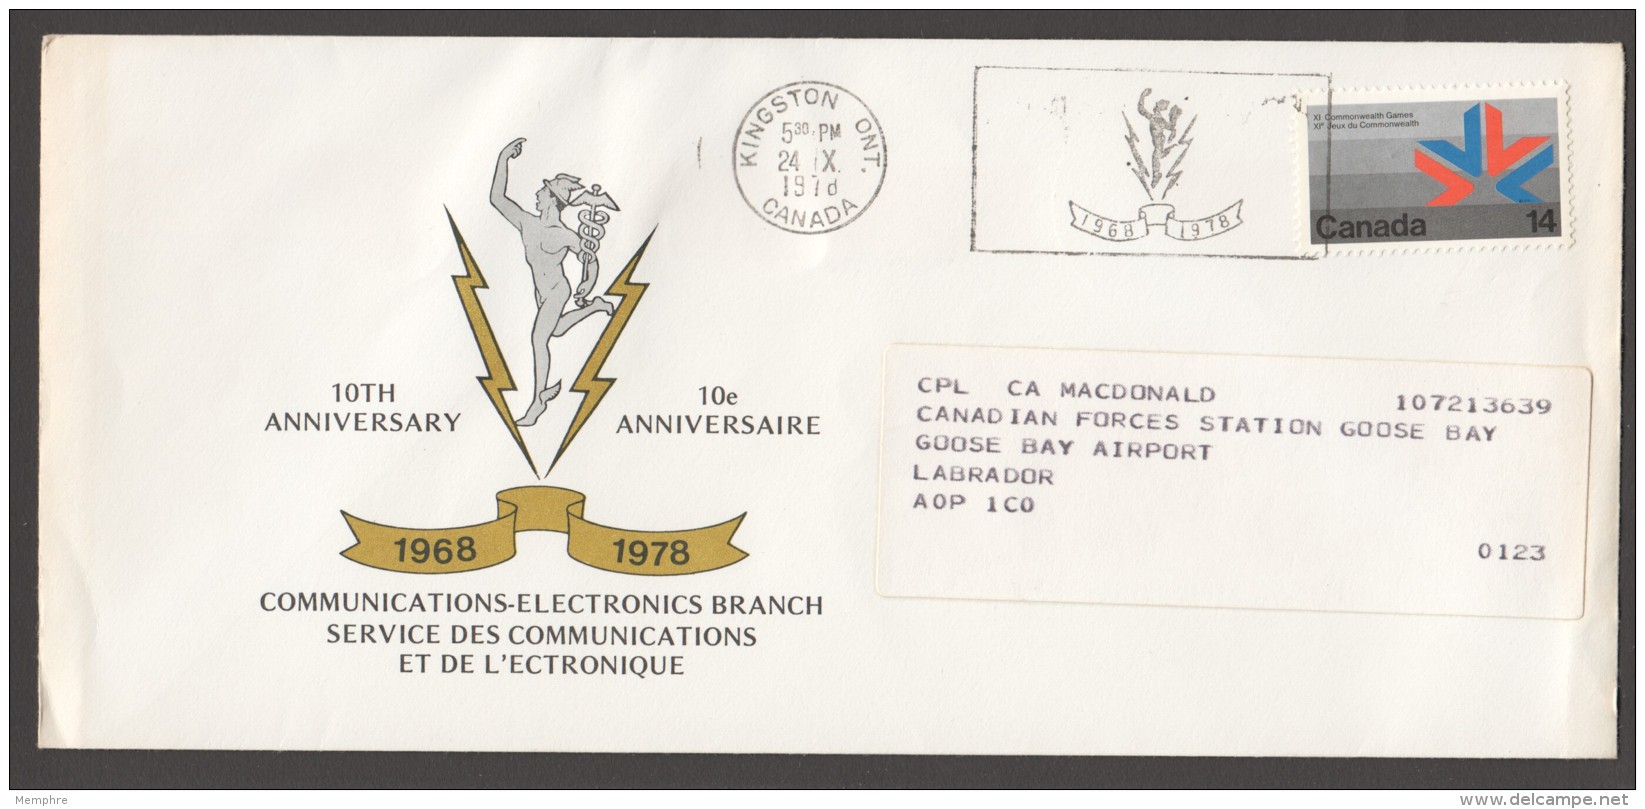 MILITARY -  Canadian Forces Communication-Electronic Branch - Special Cancel - Sobres Conmemorativos